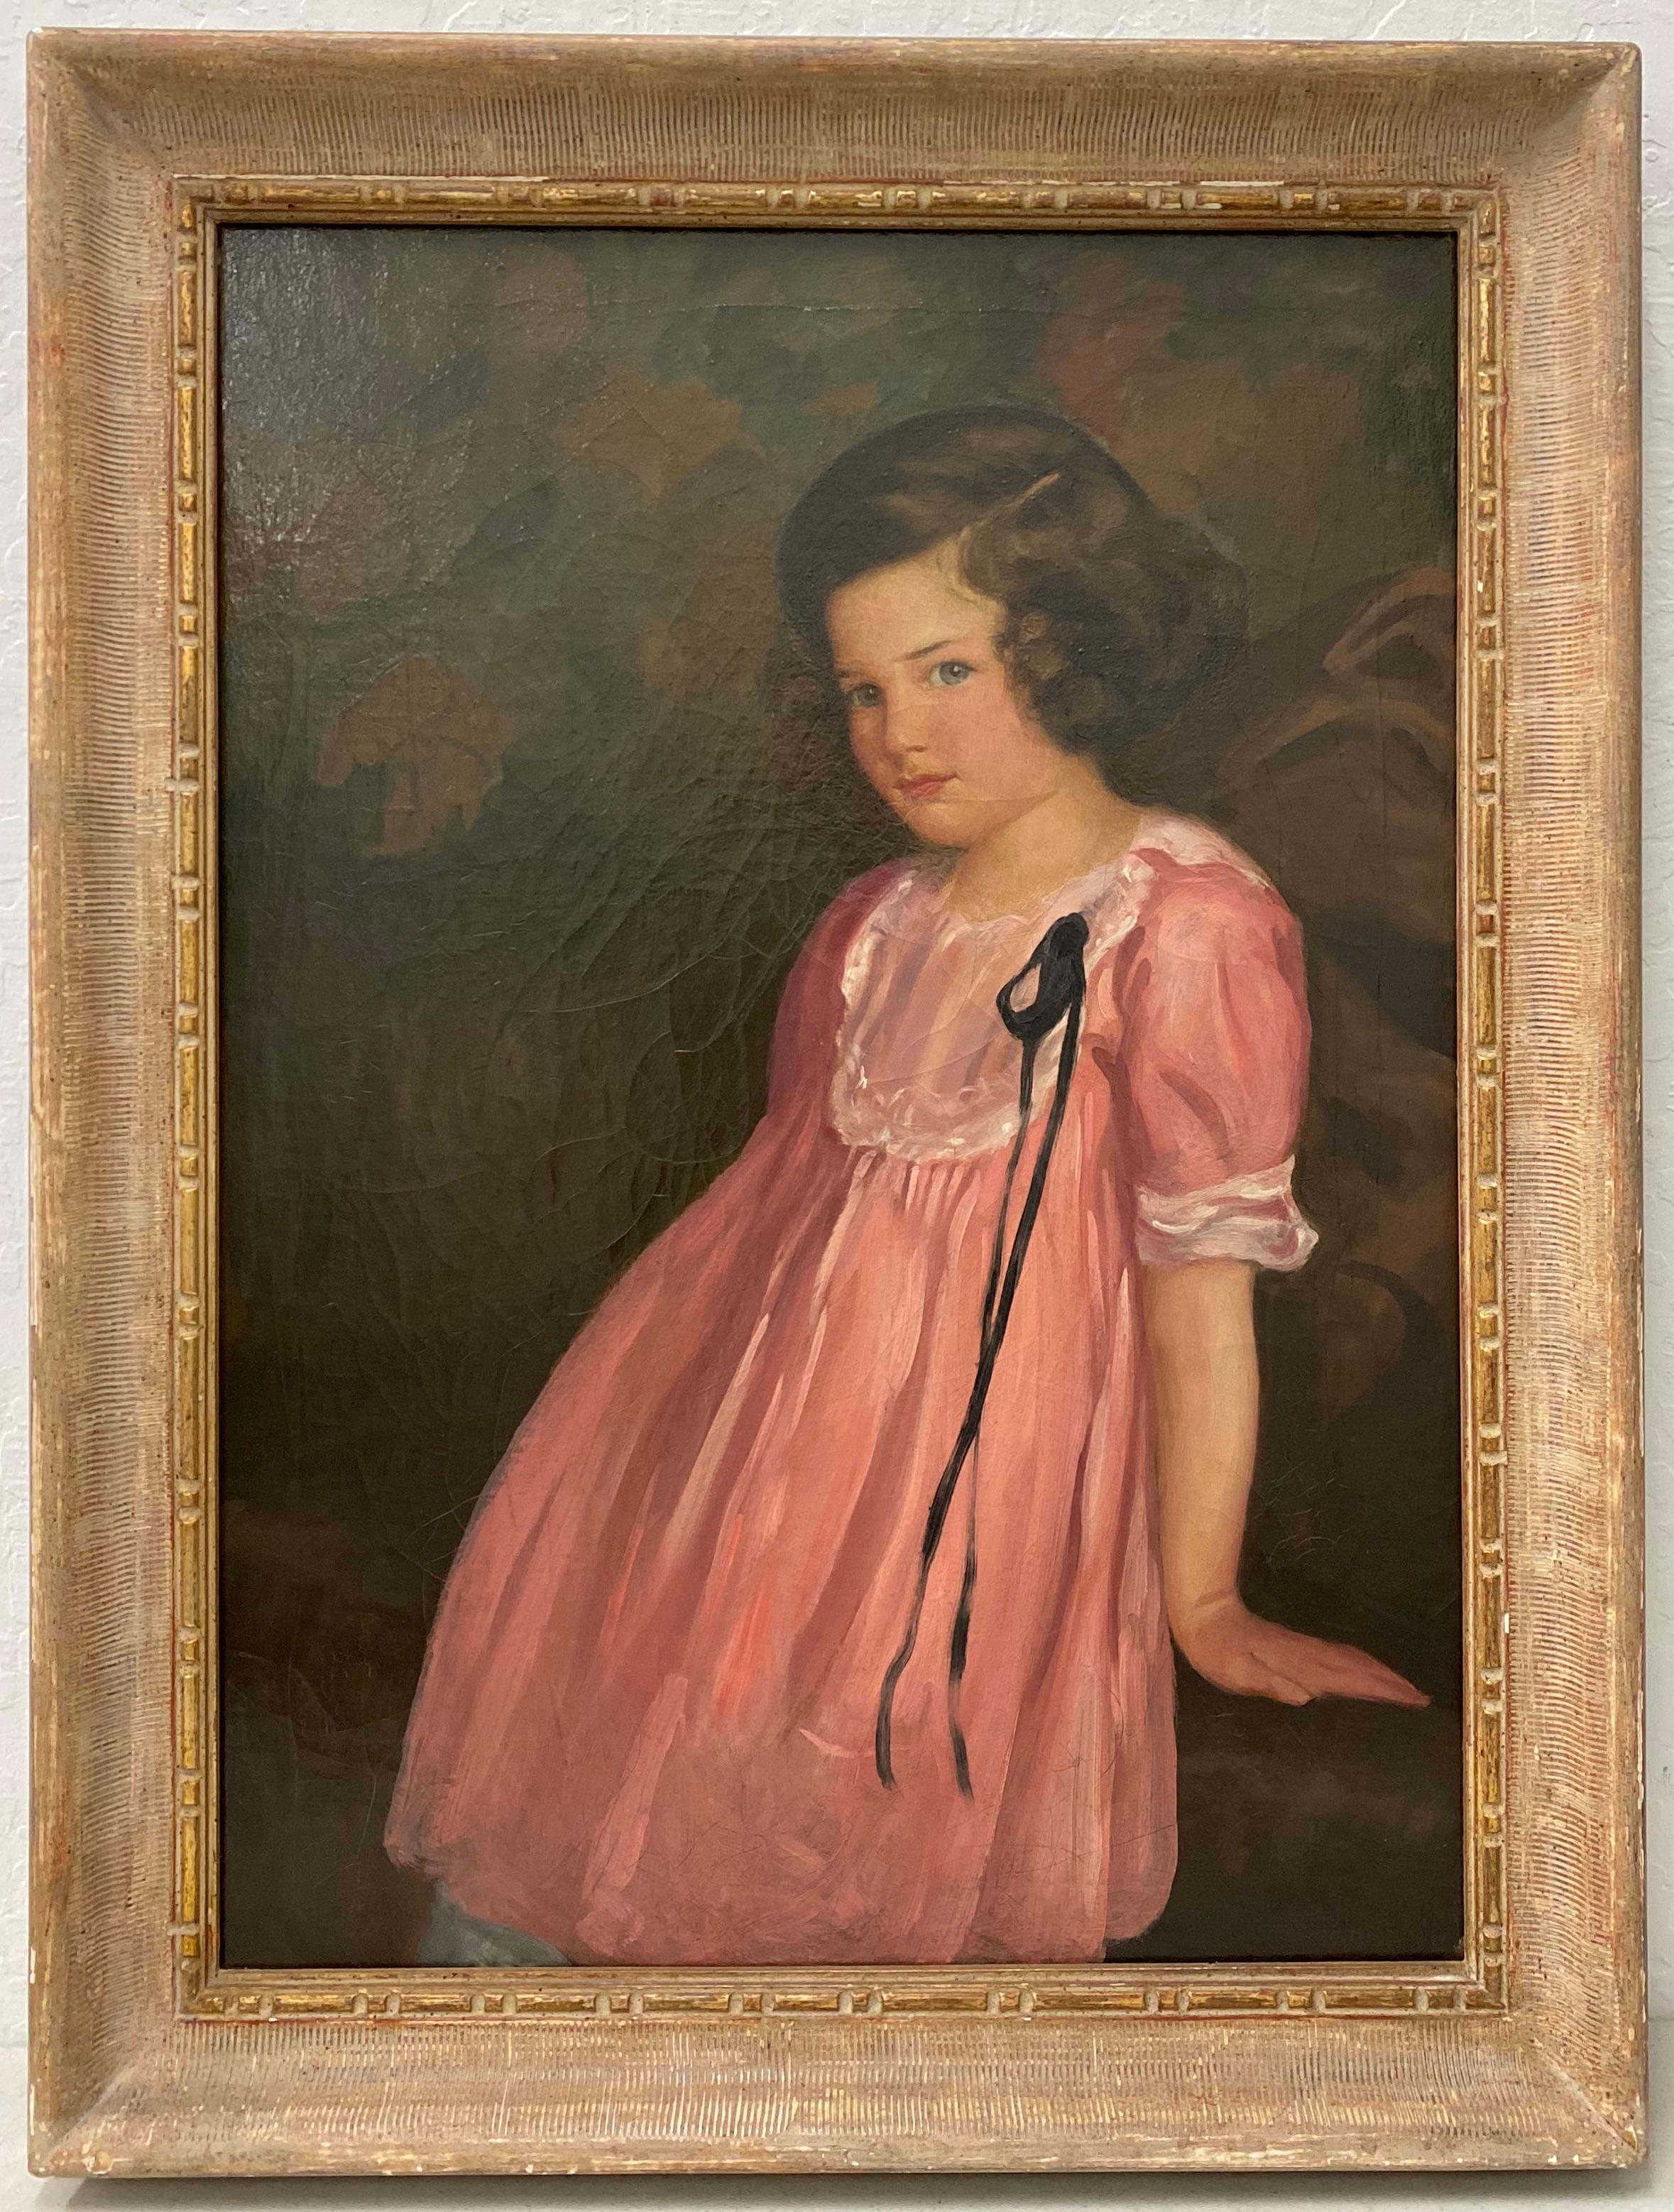 Original Oil Portrait of a Charming Young Girl in a Pink Dress by C. Rice C.1920